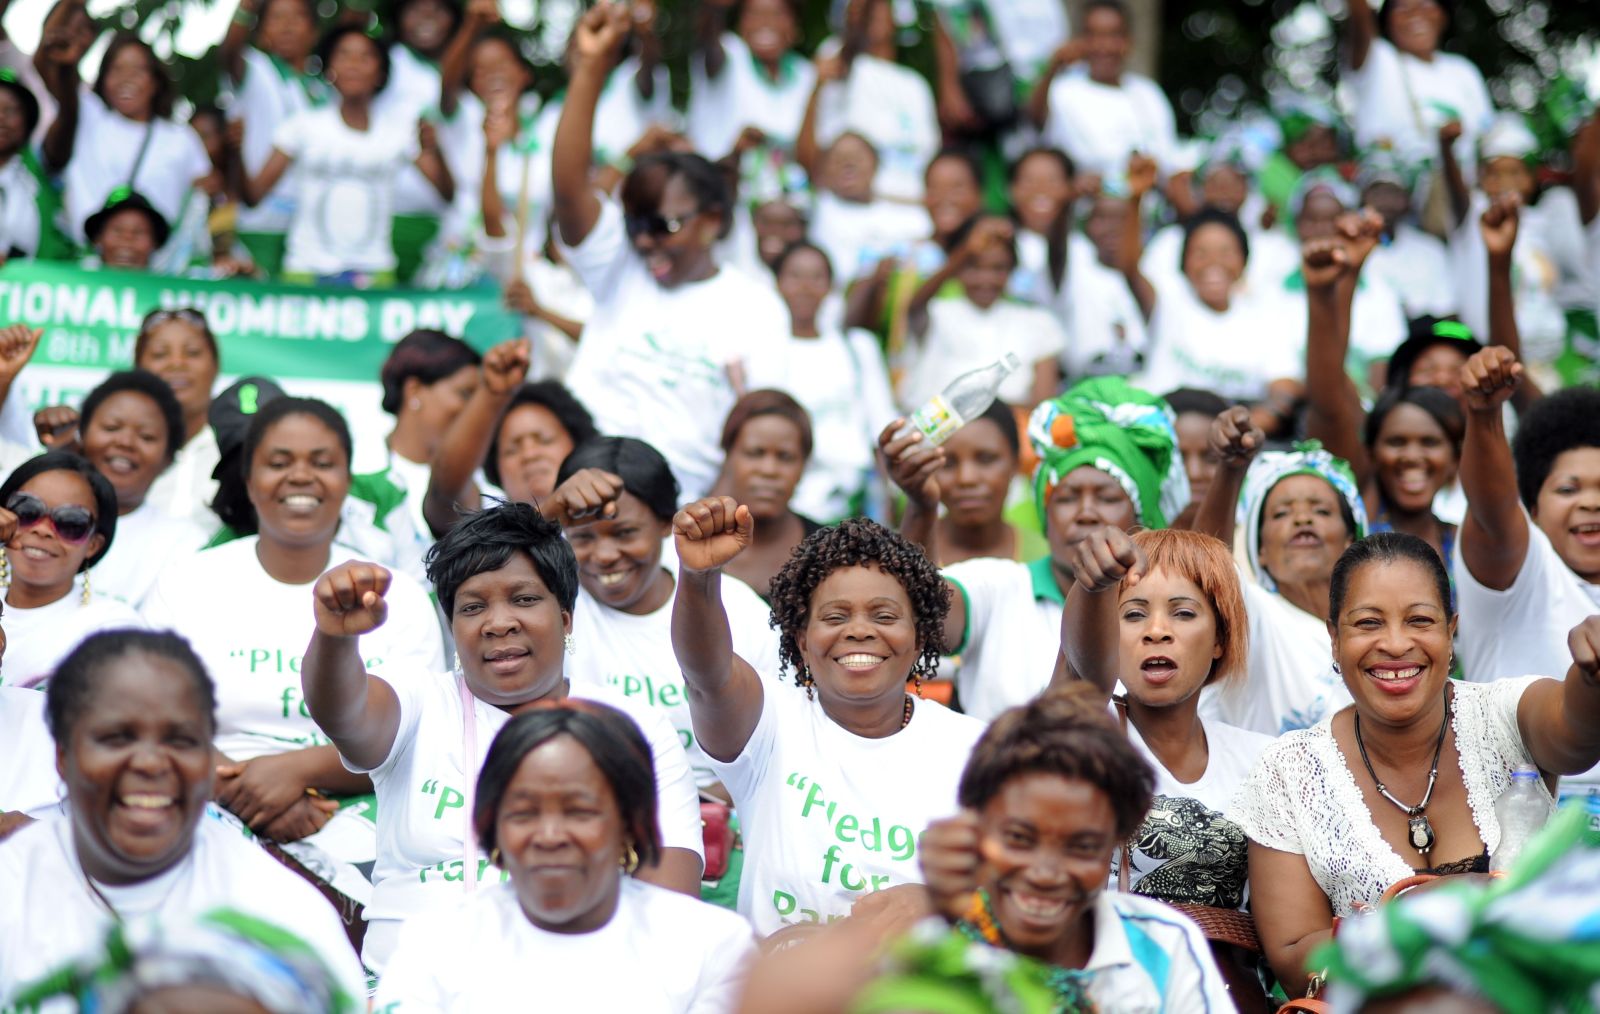 Women of the Patriotic Front, a political party in Zambia, celebrating international women’s day in 2016.